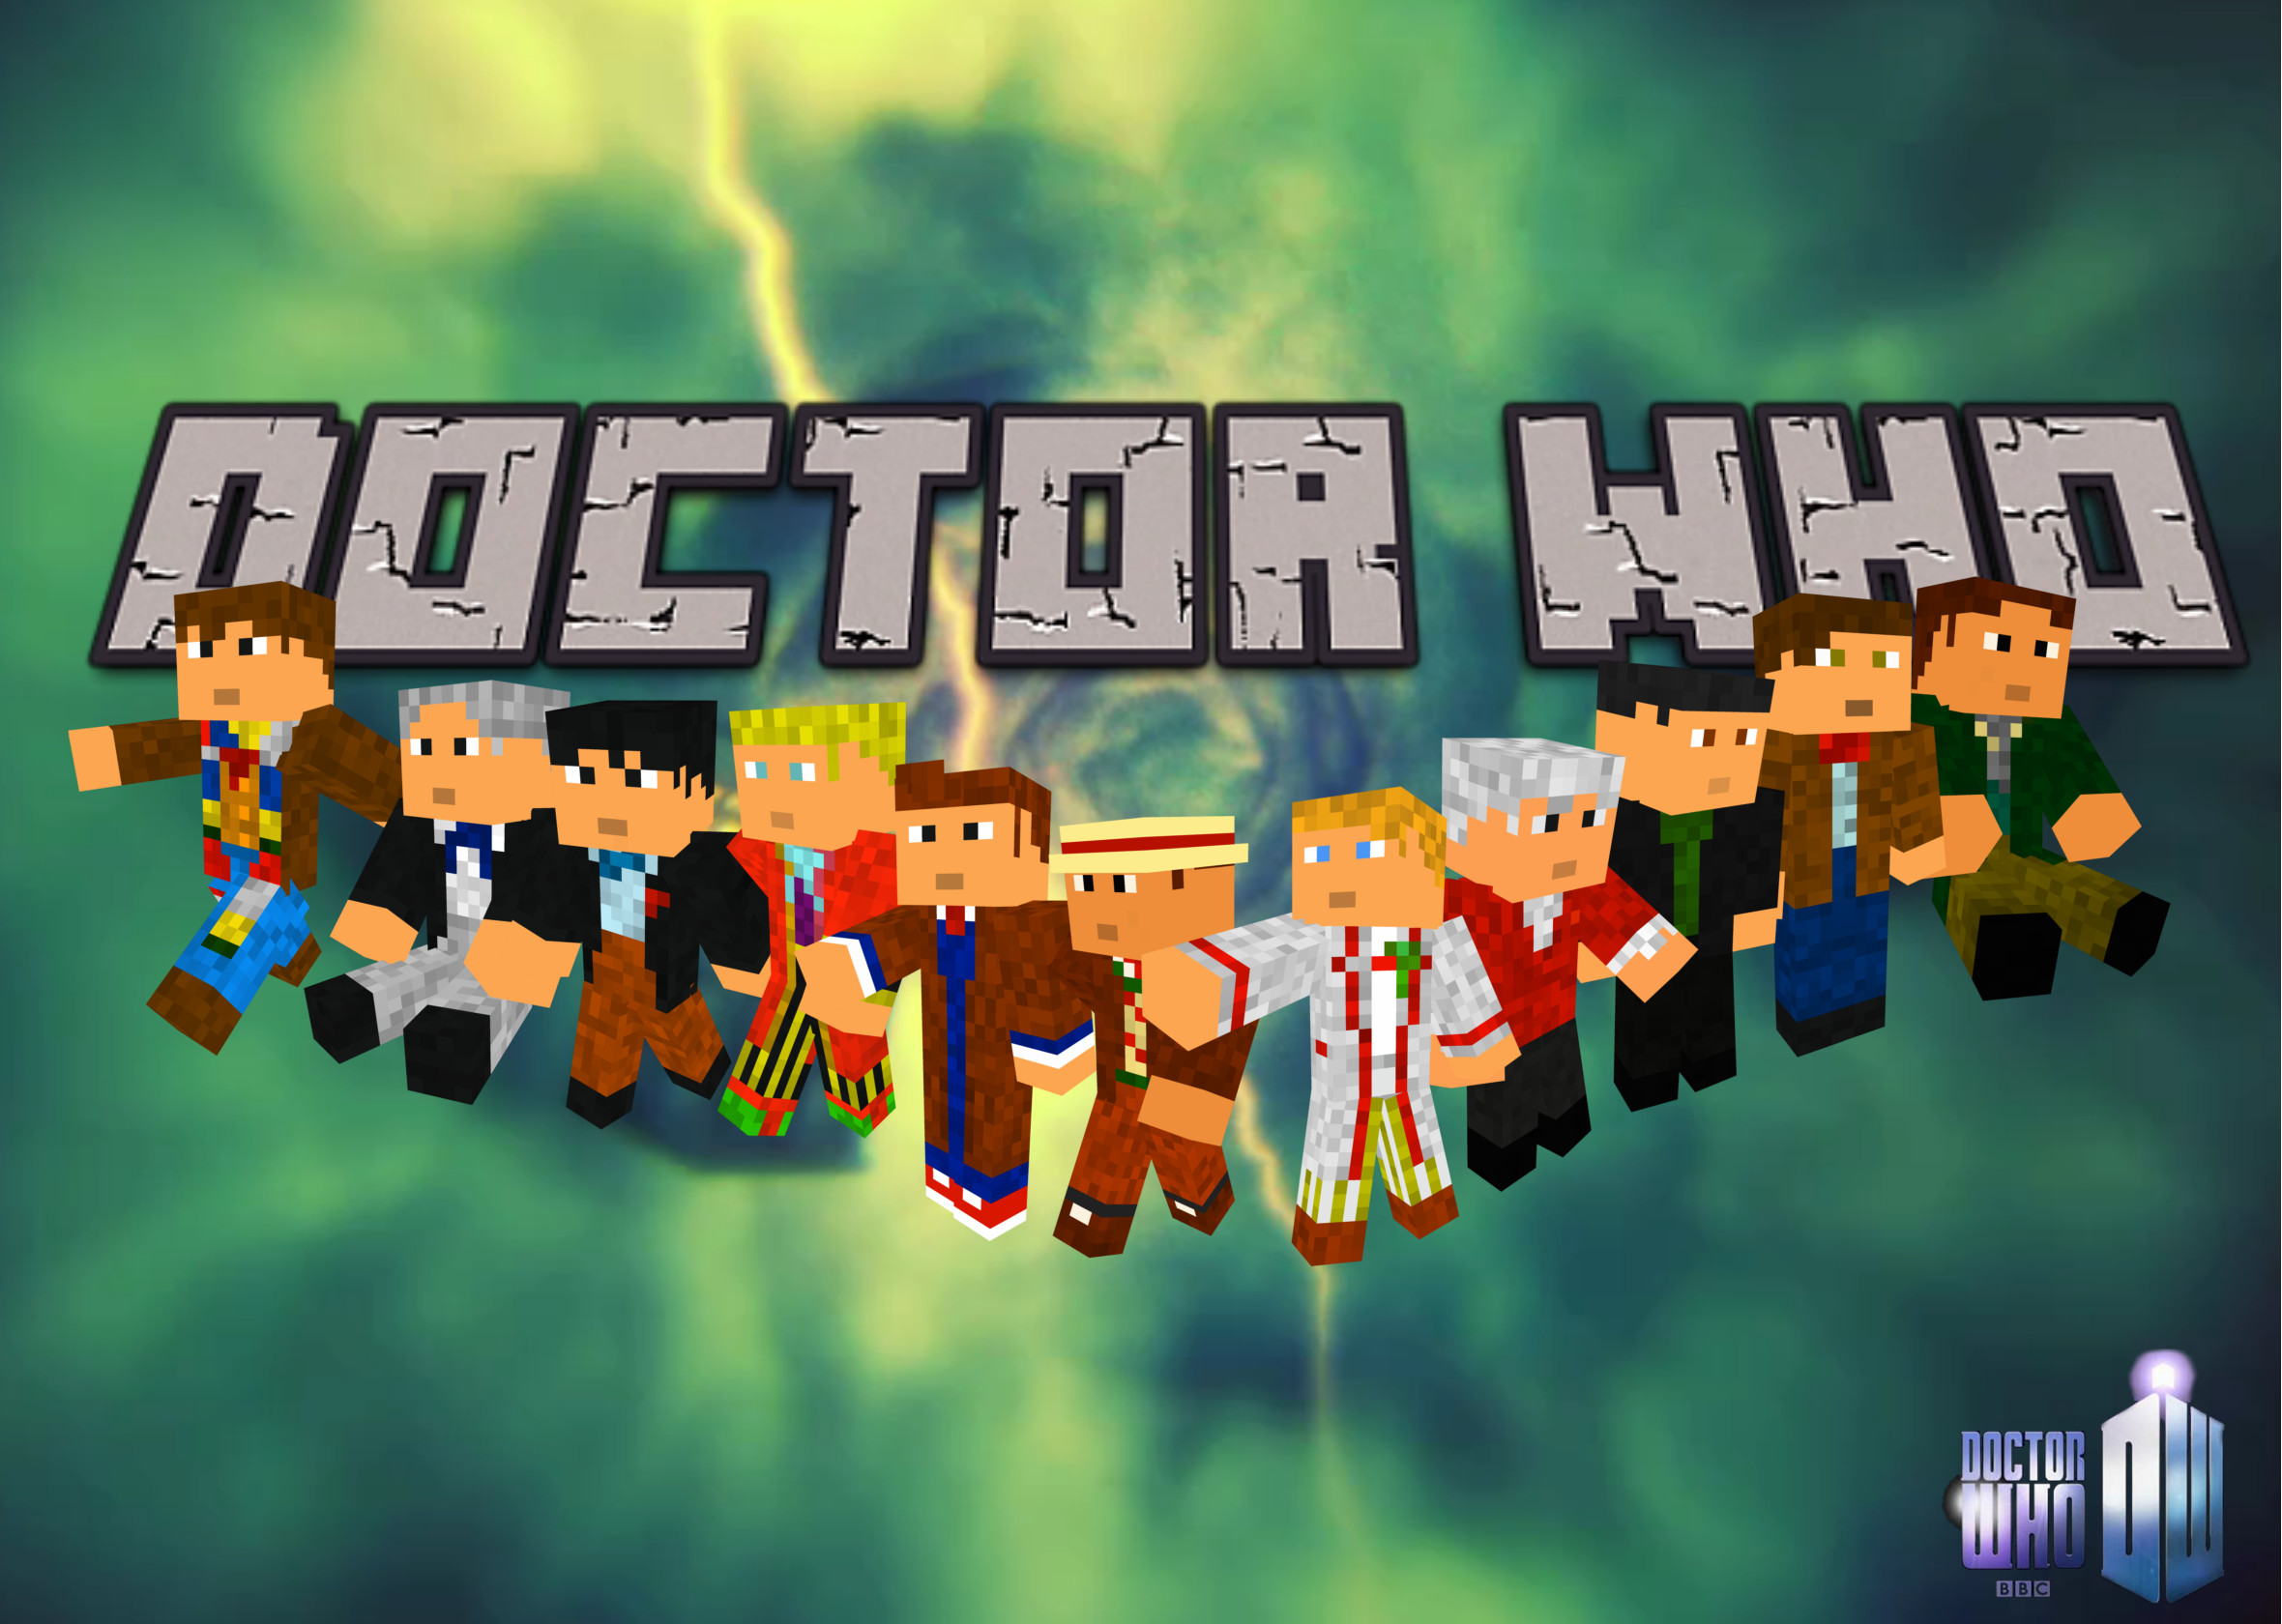 Doctor Who Minecraft Wallpaper by Captainpikachu Doctor Who Minecraft Wallpaper by Captainpikachu